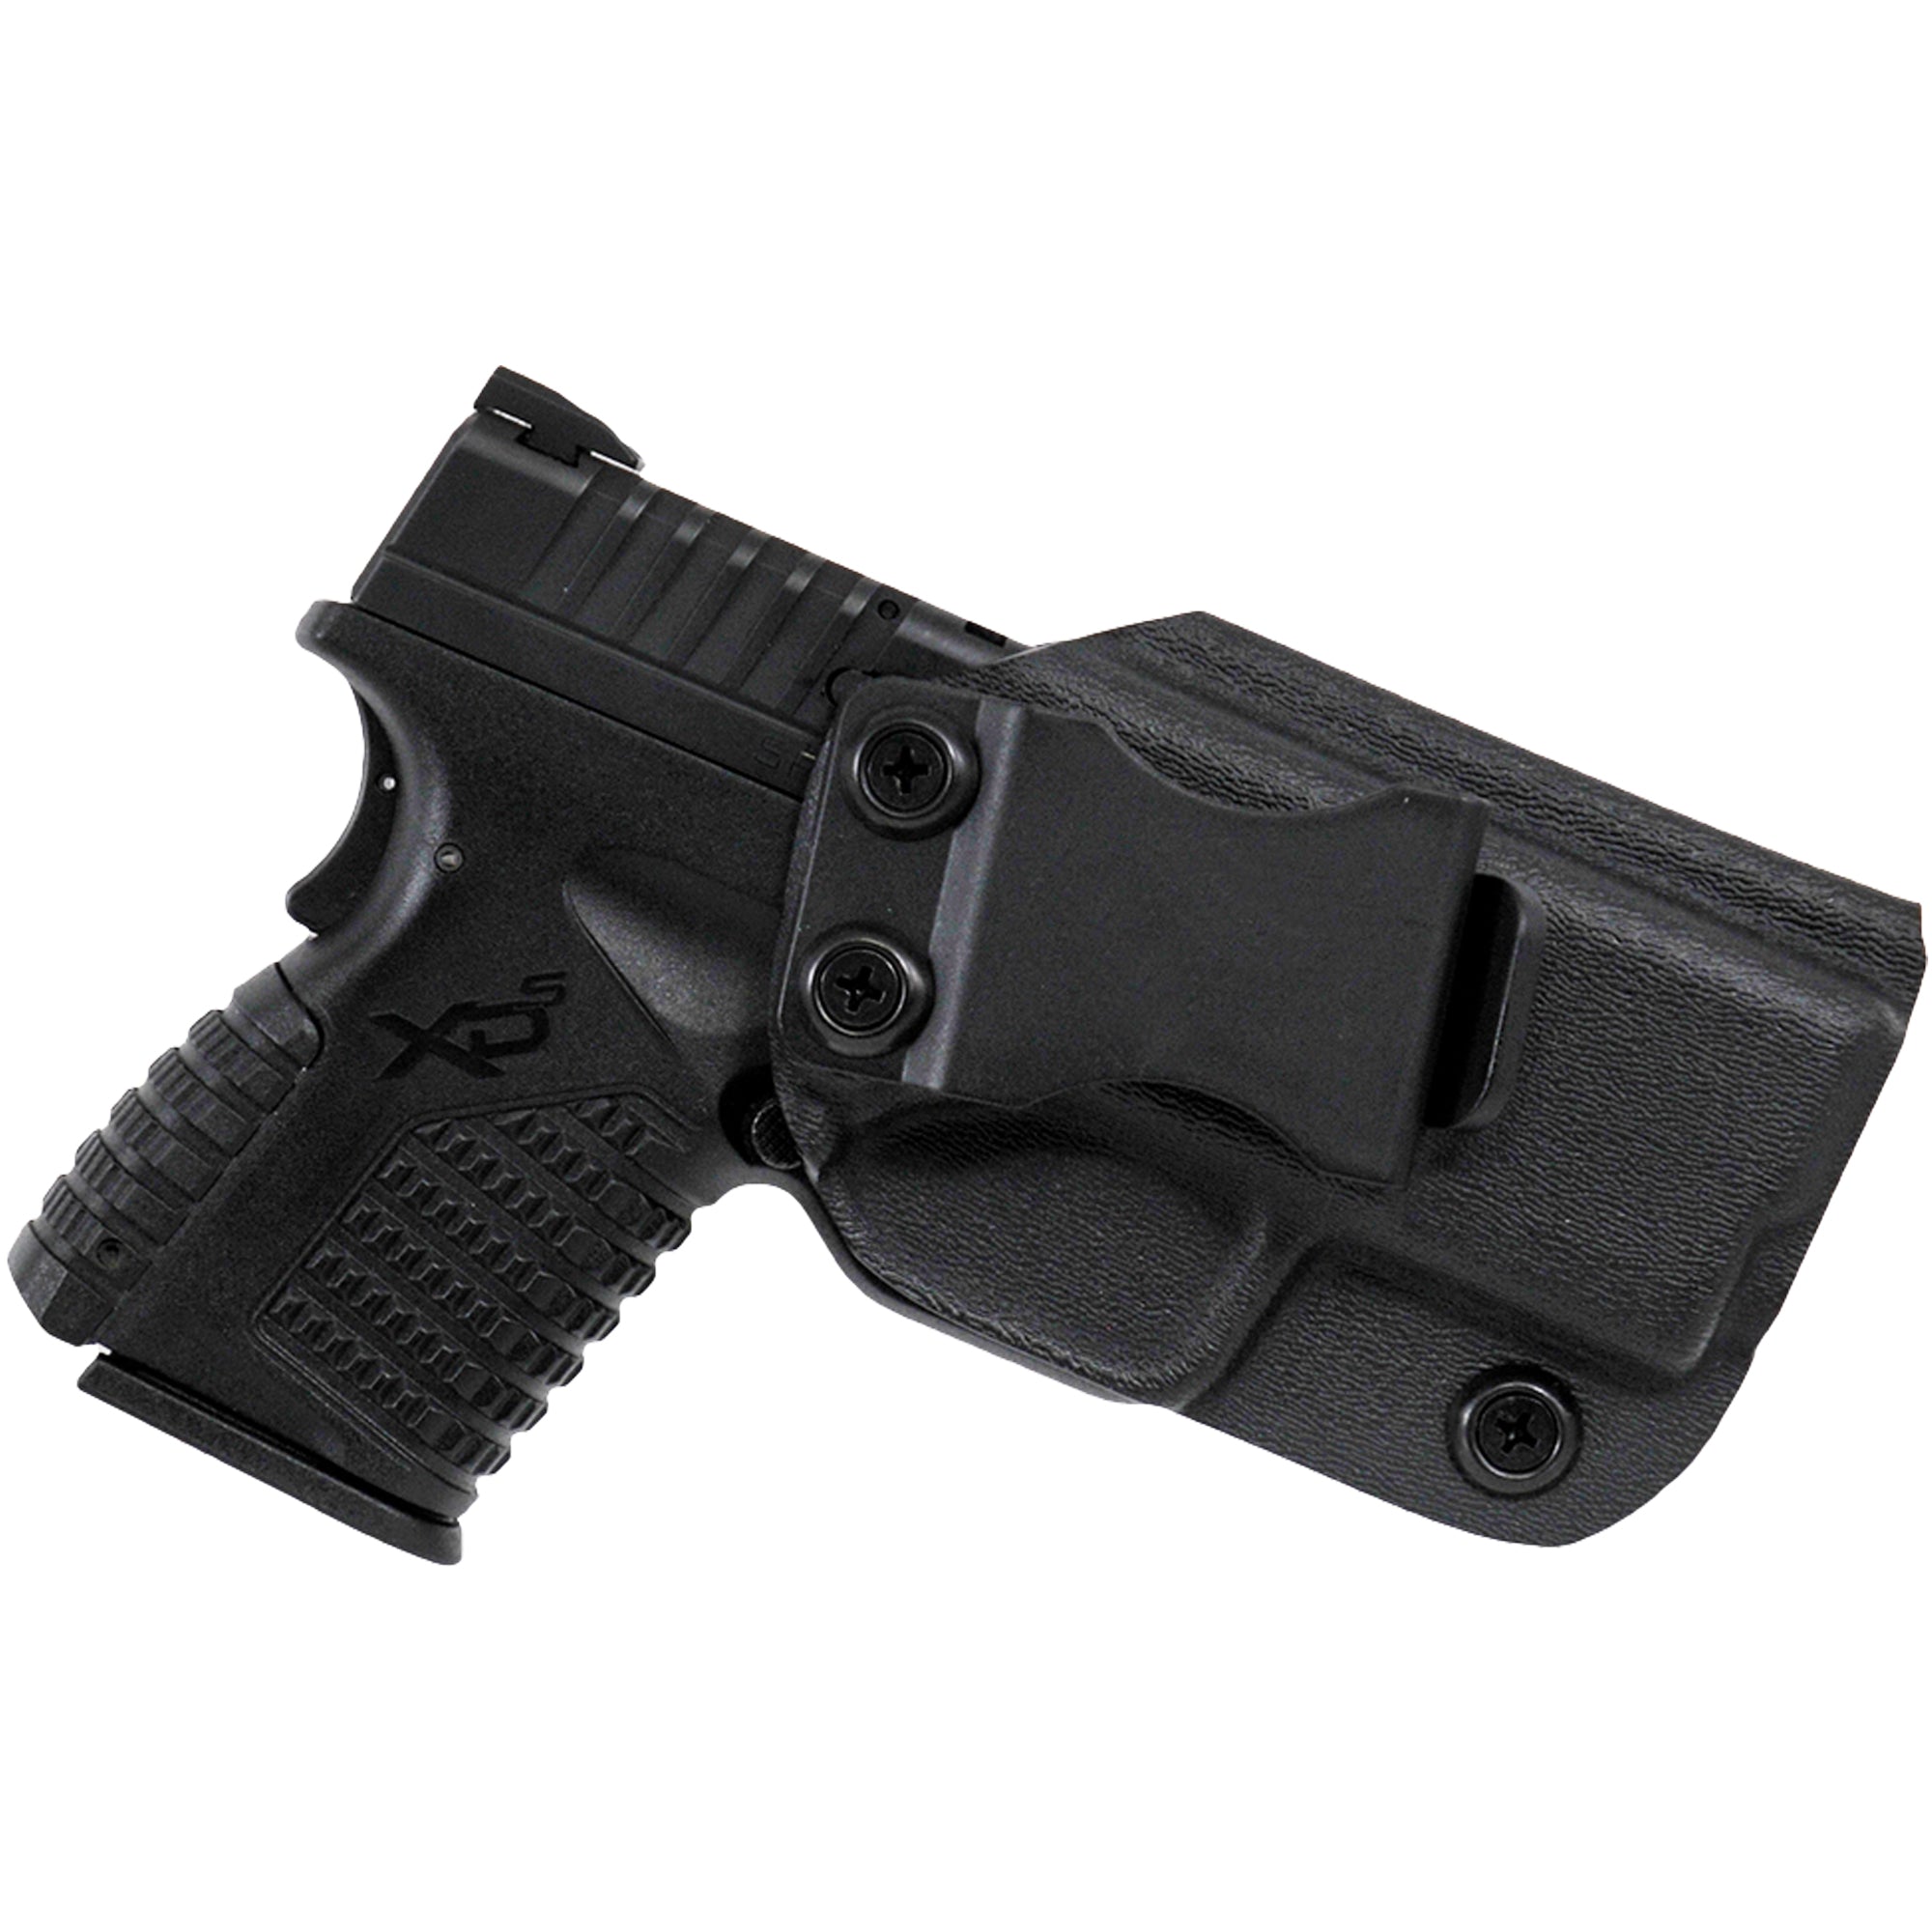 Springfield XD-S 3.3'' IWB Kydex Holster & Mag Pouch Combo